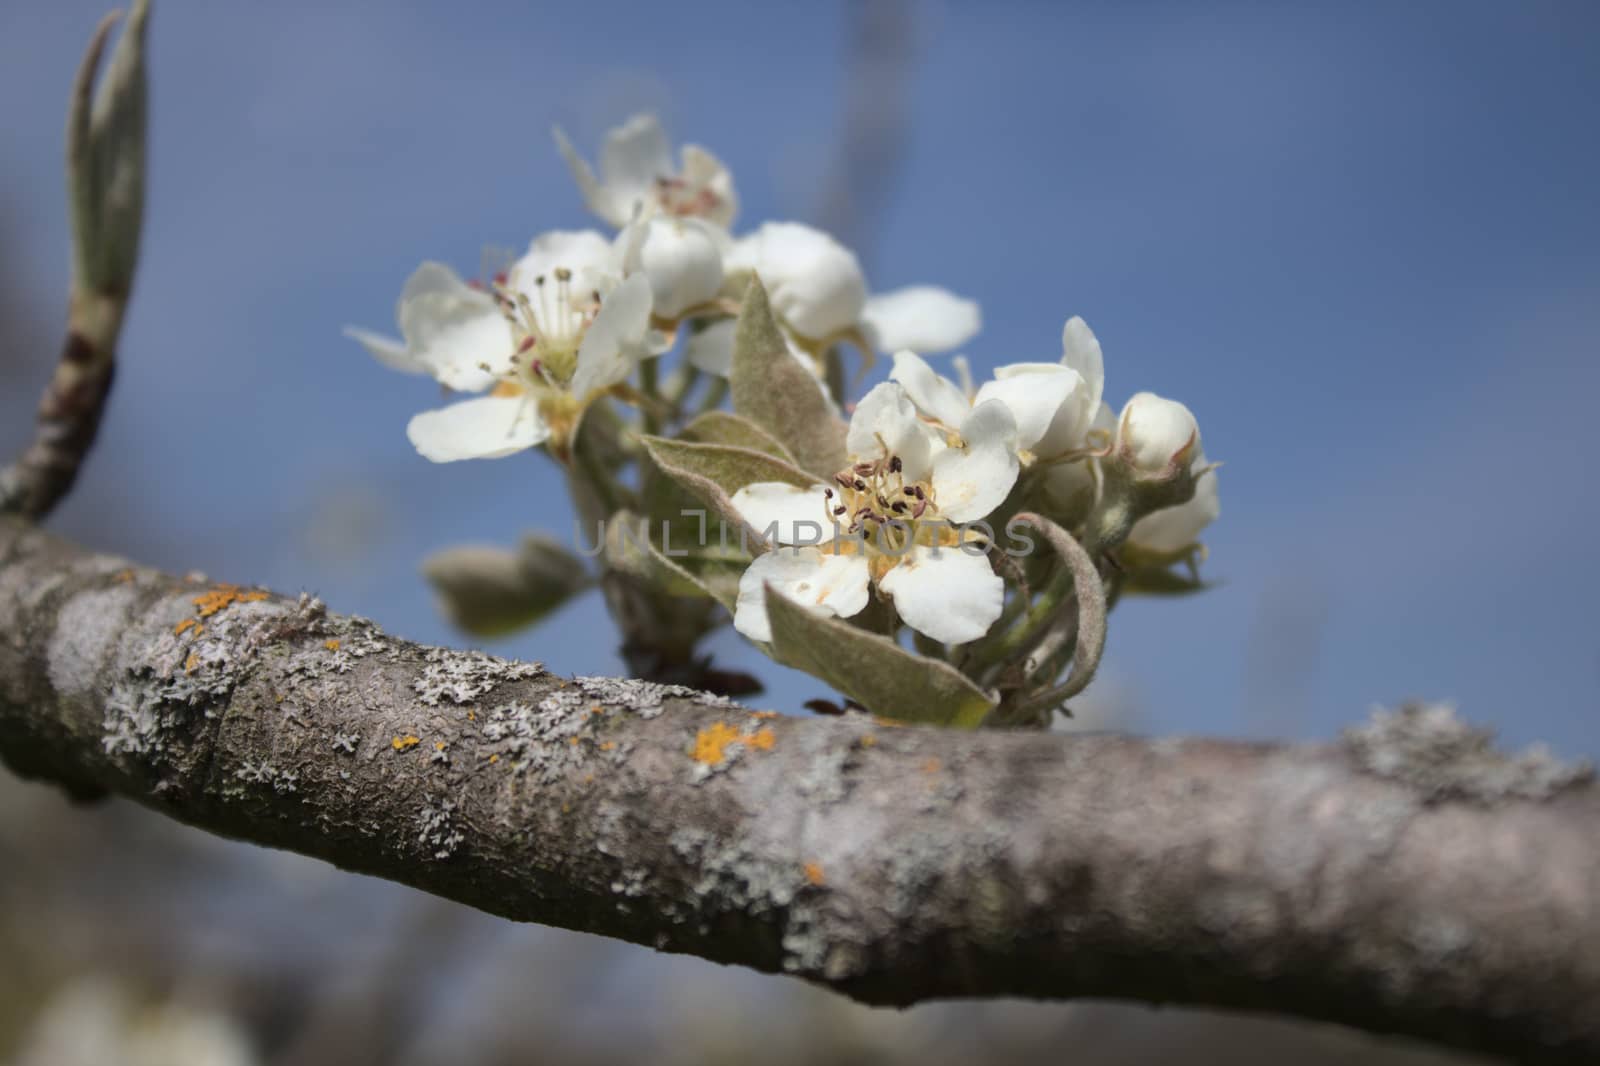 The picture shows blossoms of a pear tree